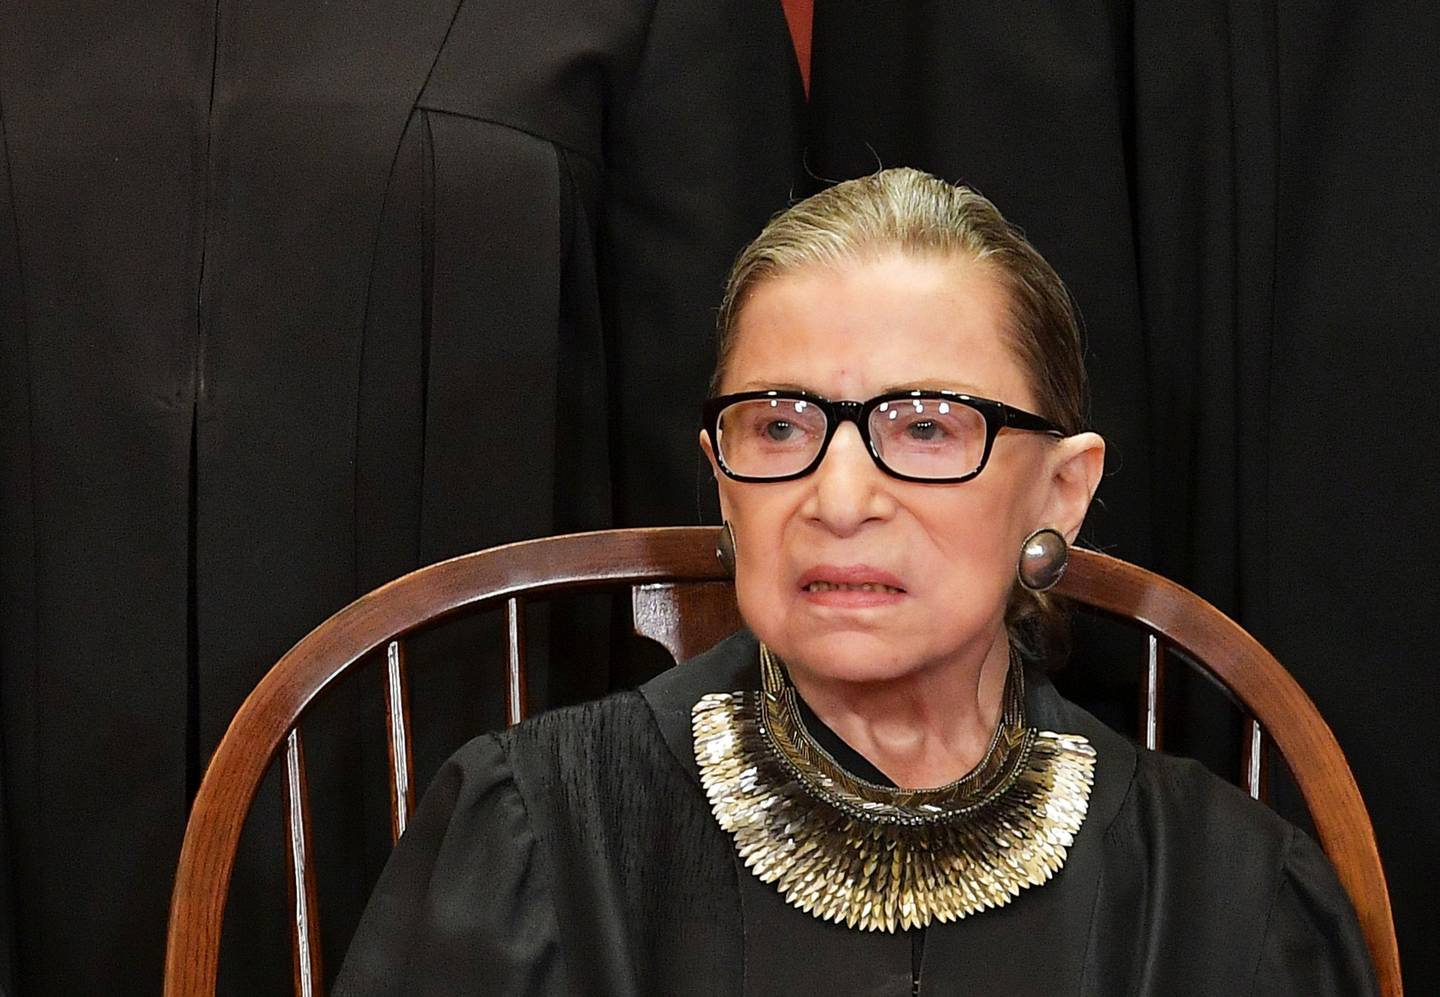 (FILES) In this file photo taken on November 30, 2018 Associate Justice Ruth Bader Ginsburg poses for the official photo at the Supreme Court in Washington, DC. - Progressive icon and doyenne of the US Supreme Court, Ruth Bader Ginsburg, has died at the age of 87 after a battle with pancreatic cancer, the court announced on September 18, 2020. Ginsburg, affectionately known as the Notorious RBG, passed away "this evening surrounded by her family at her home in Washington, DC," the court said in a statement. (Photo by MANDEL NGAN / AFP)